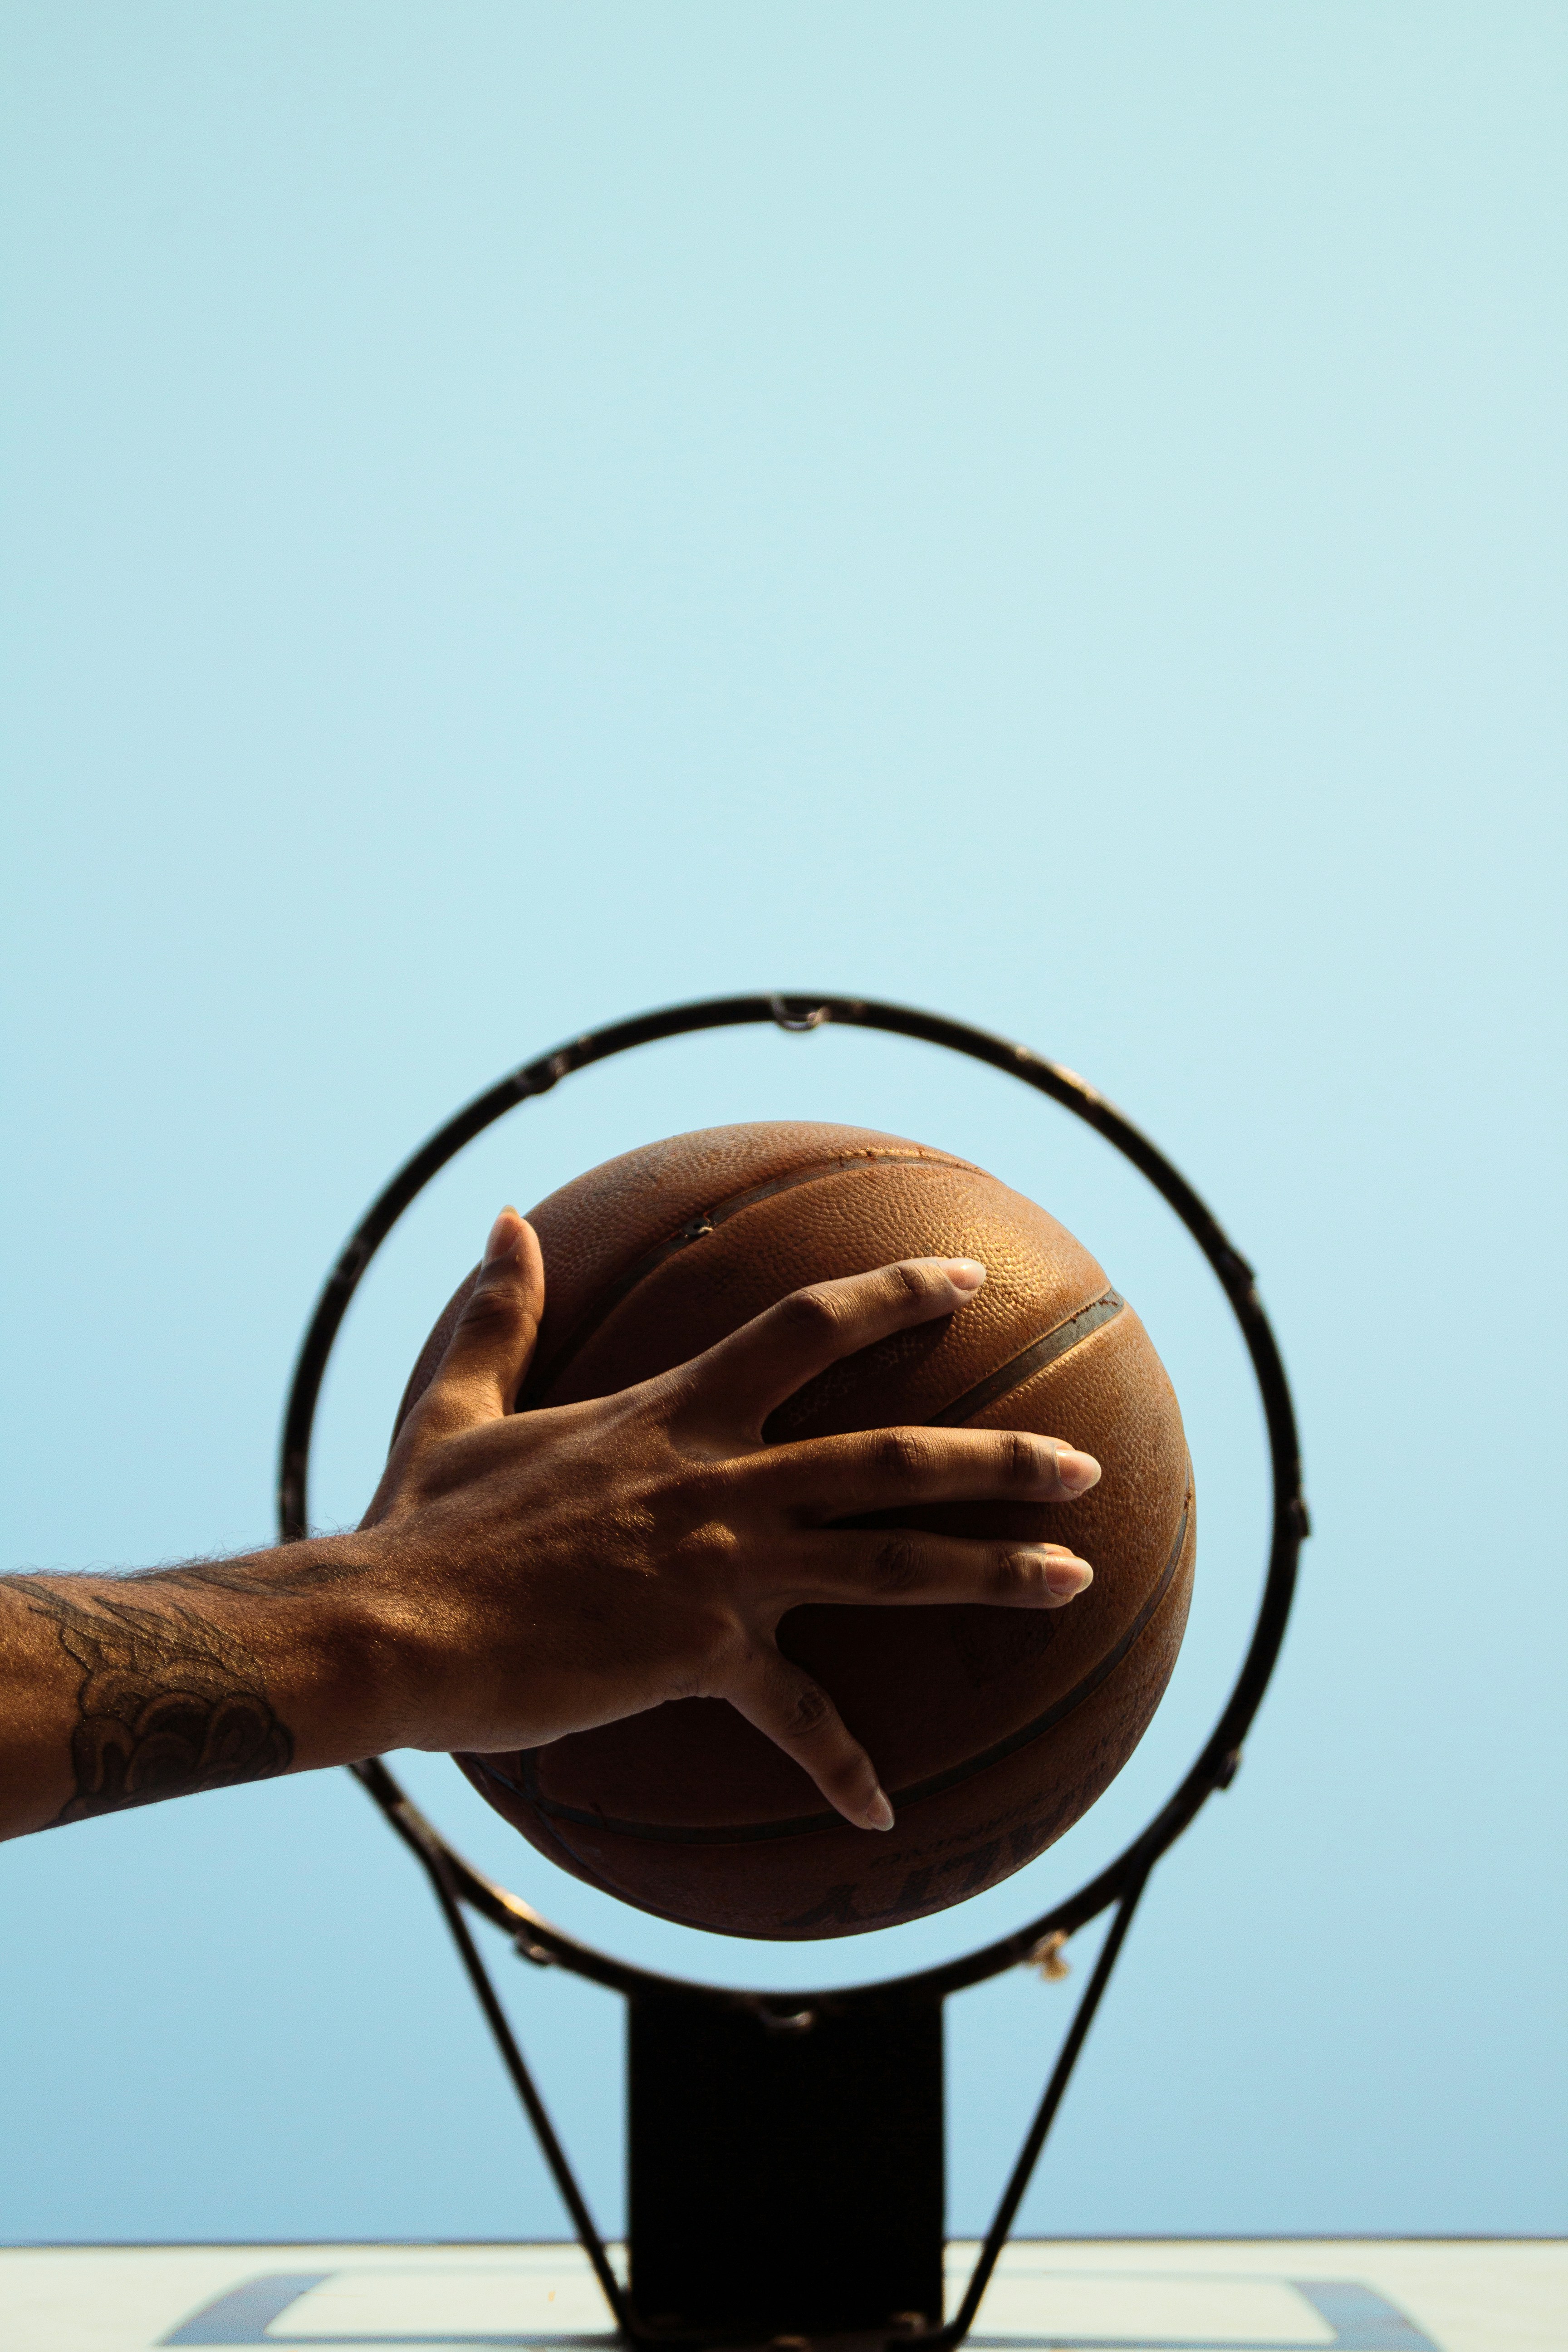 Choose from a curated selection of basketball photos. Always free on Unsplash.